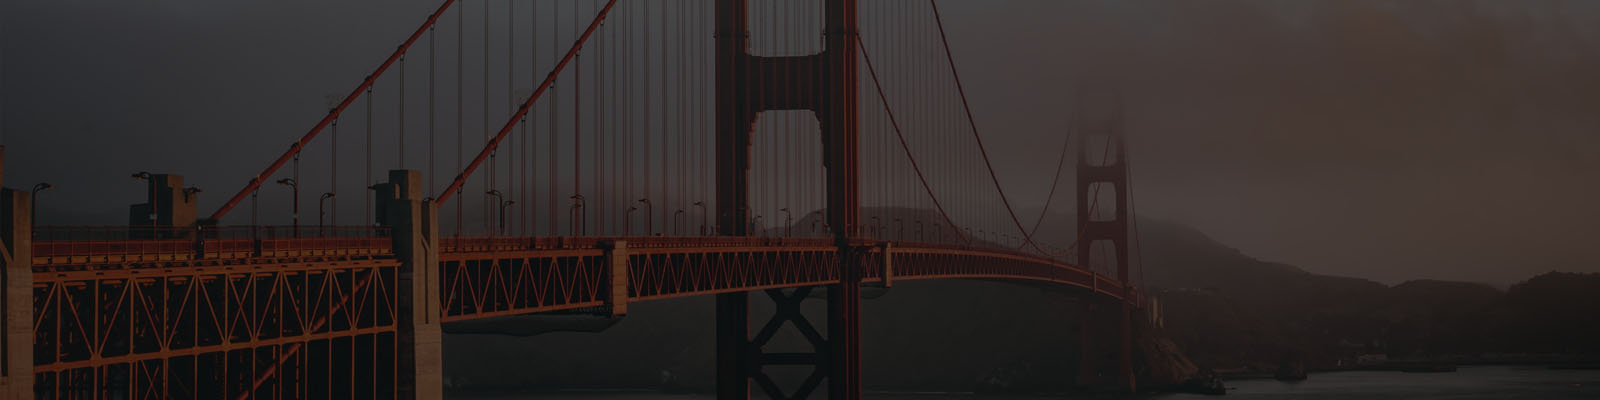 Golden Gate Bridge banner with a dropshadow over the top